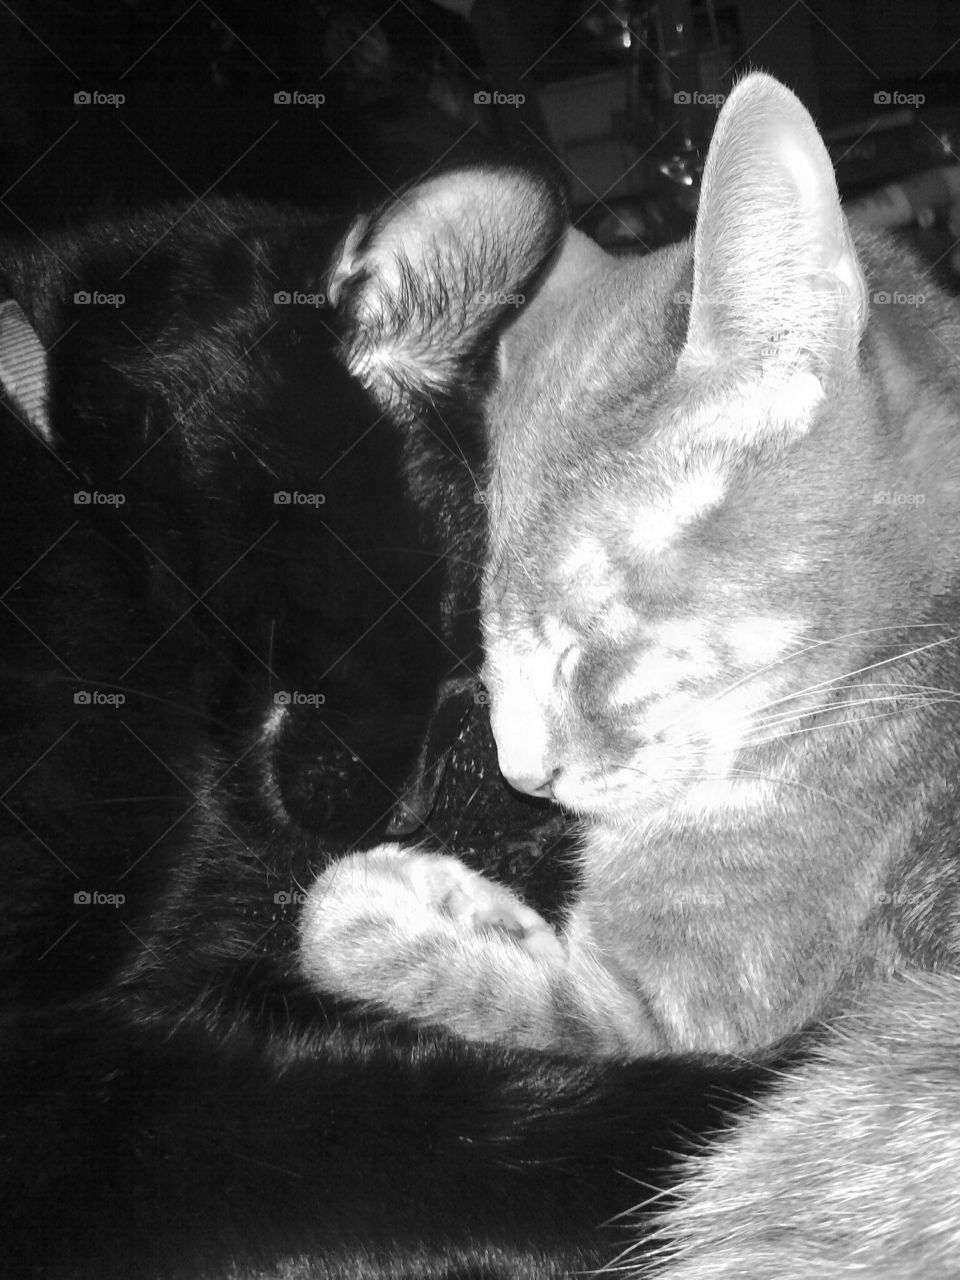 Cat Yen and Yang. My 2 kitties snuggling on a cold day. 